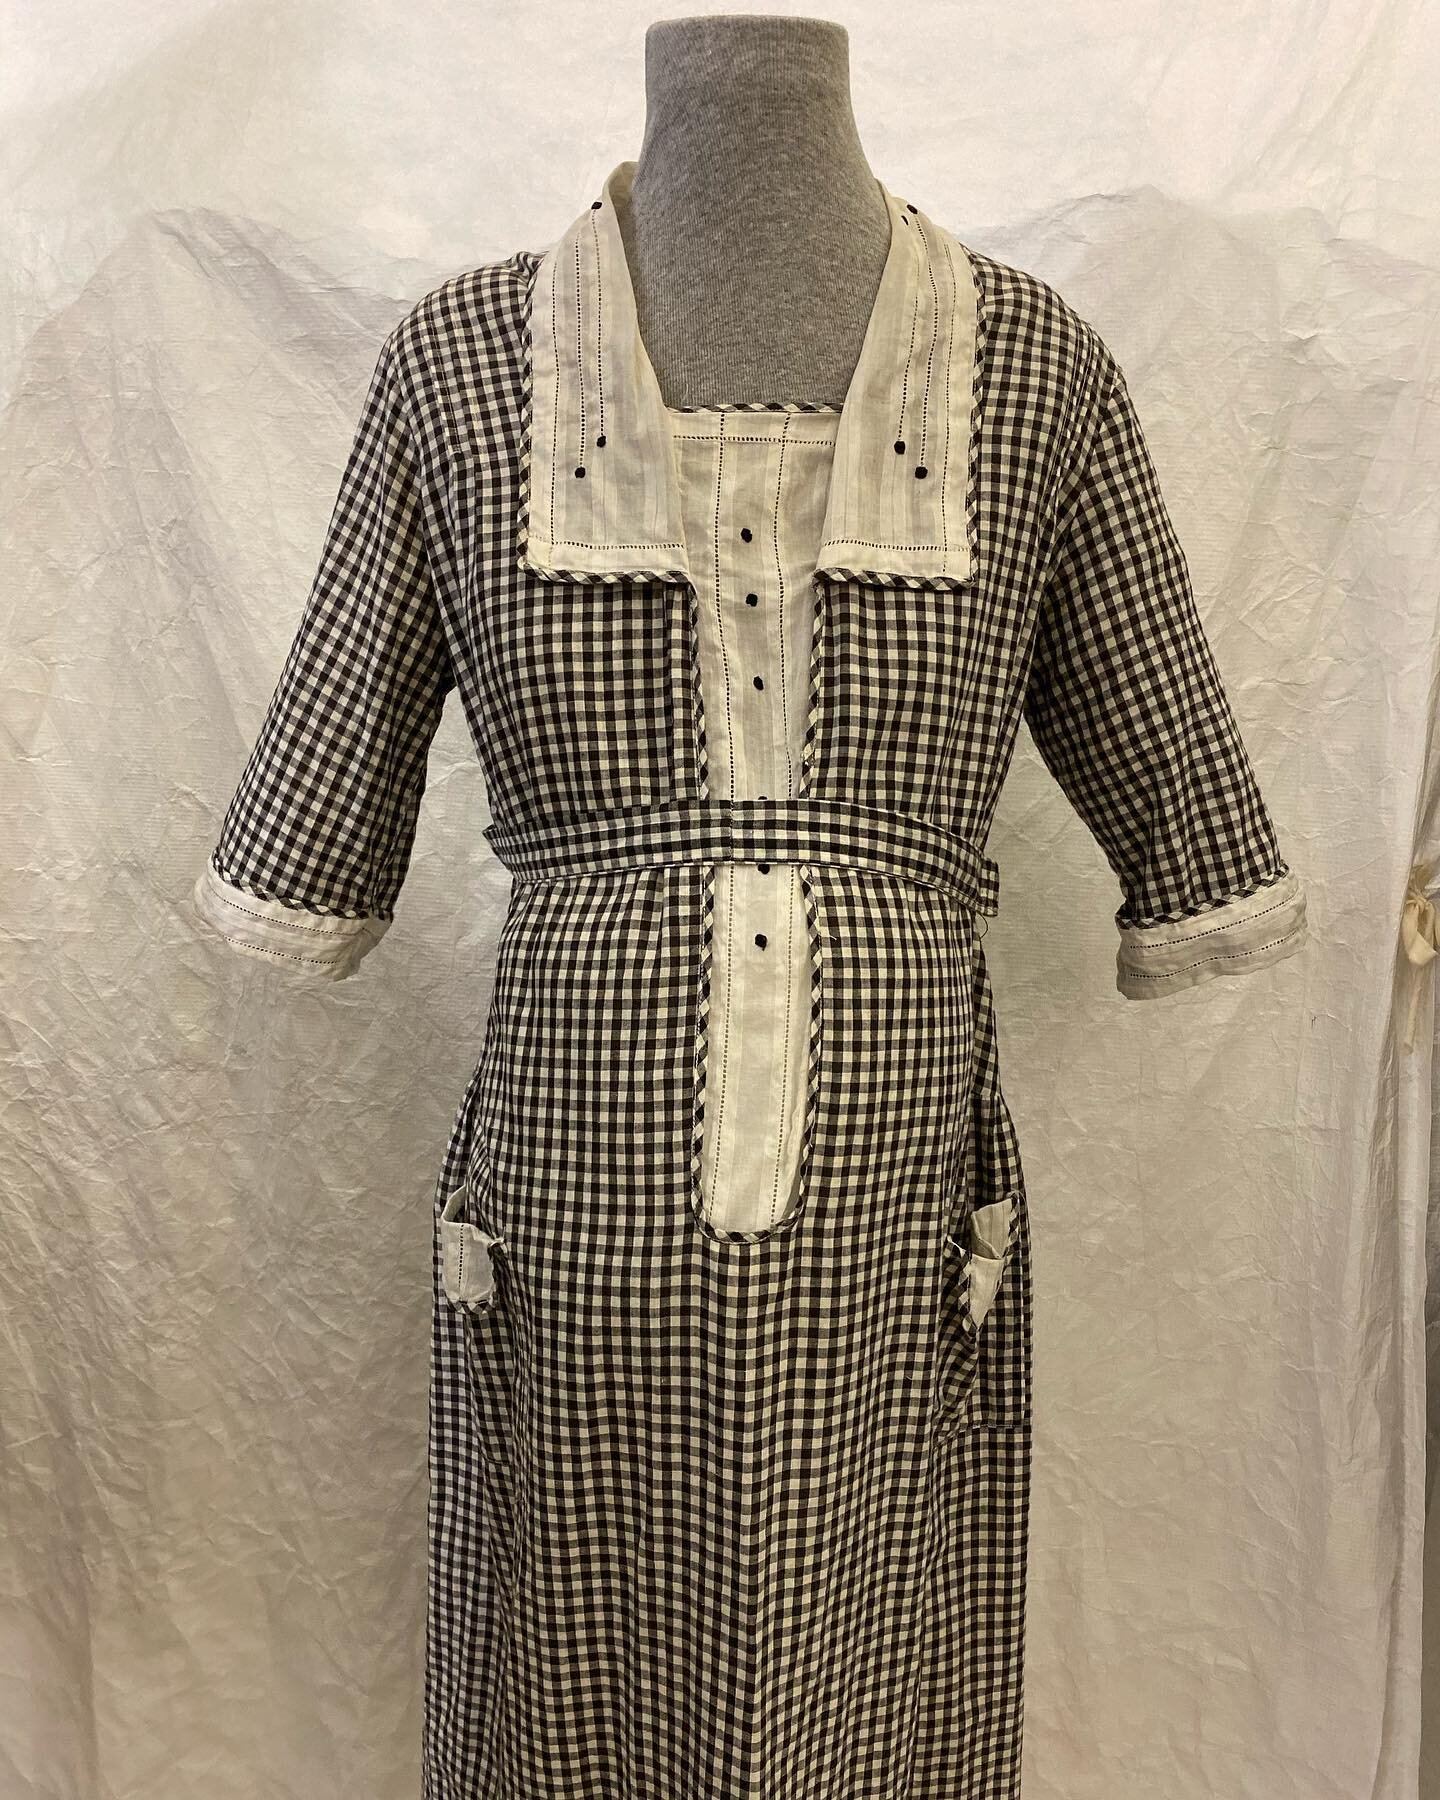 1920s Maternity Dress. Detroit Historical Society, 1961.001.003. 
I often study garments lying flat on tables, sometimes because of poor condition, but it&rsquo;s when you see them on forms that the maternity-appropriate shape becomes really clear. V